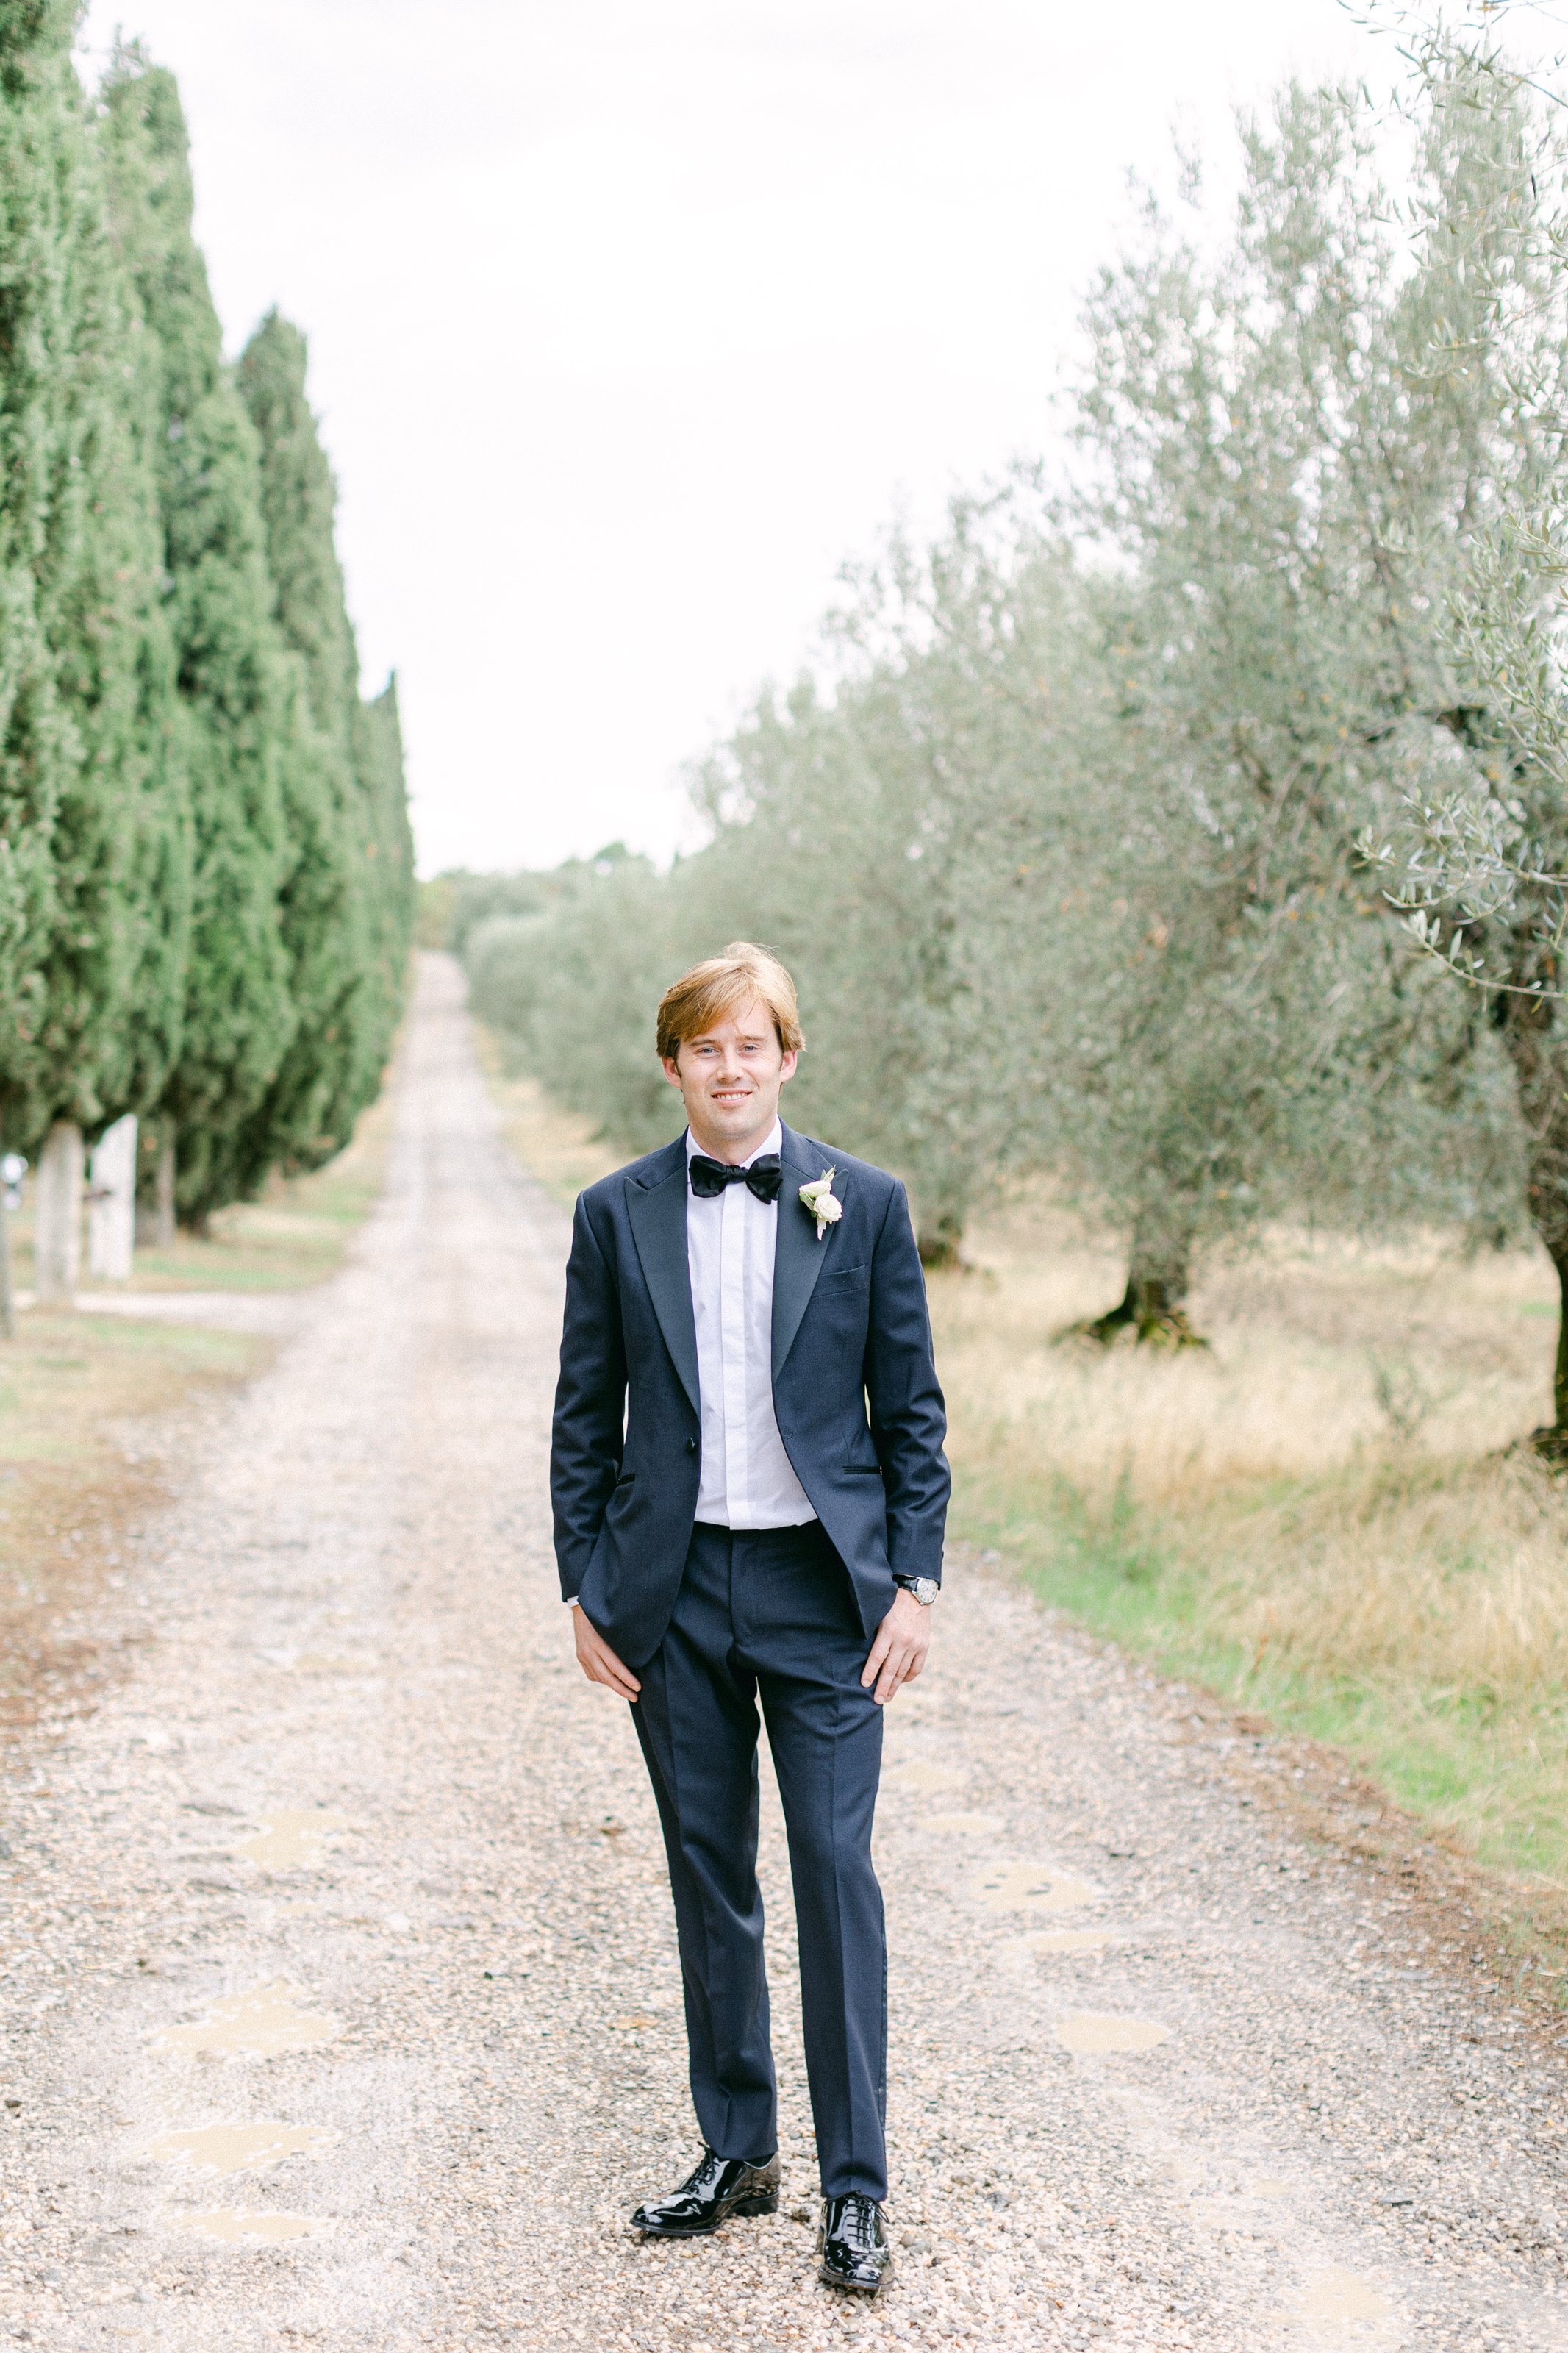 Groom outside in Tuscany waiting to be married